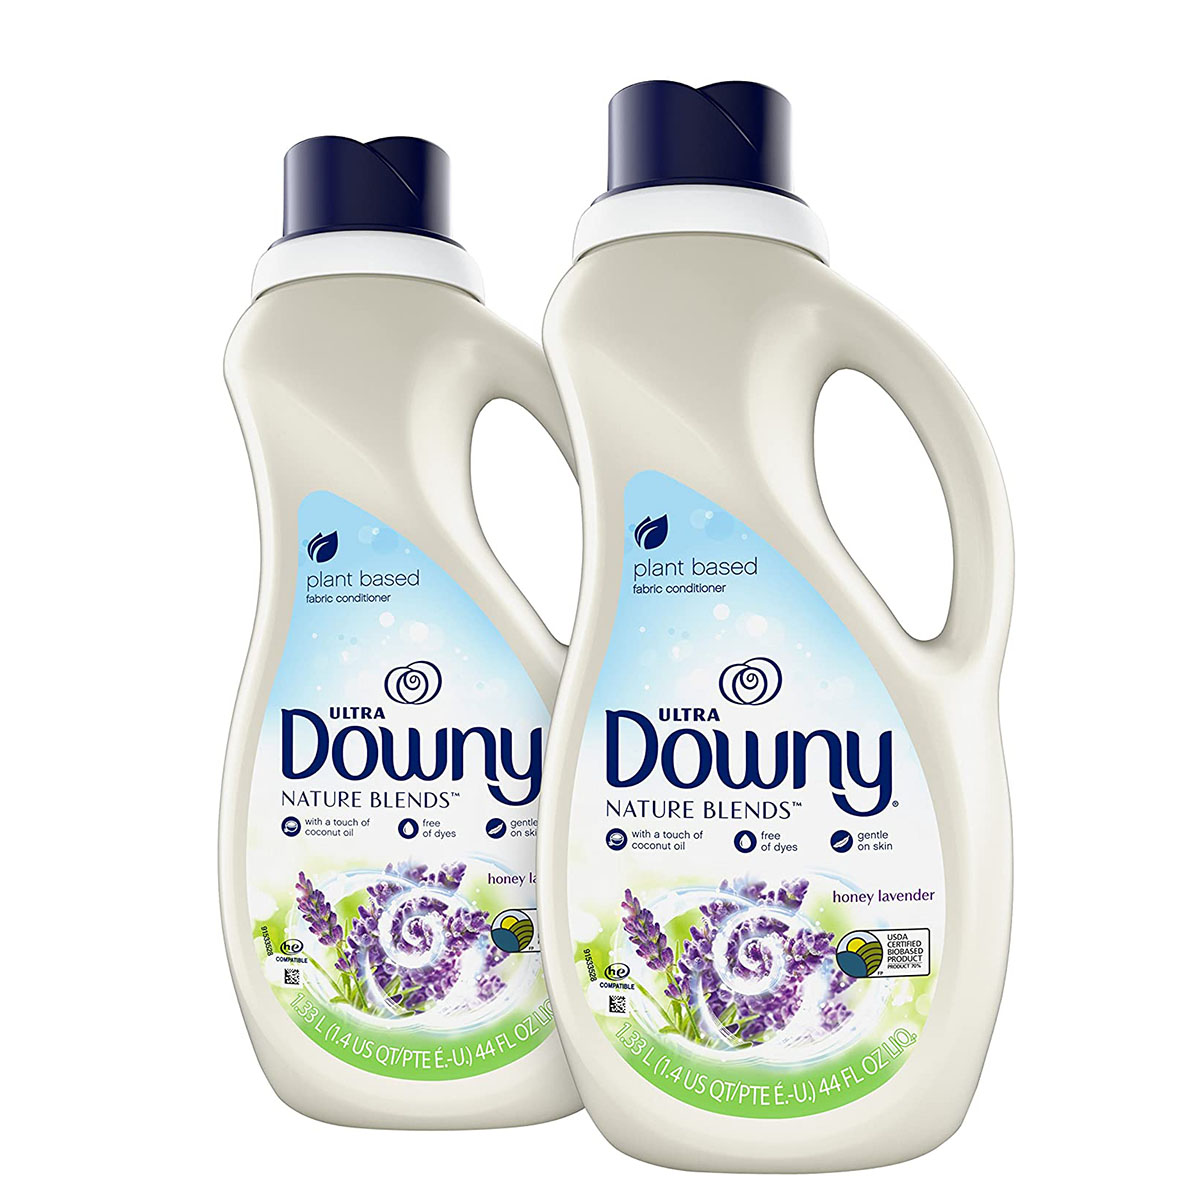 Best Fabric Softener Options: Downy Nature Blends Fabric Conditioner